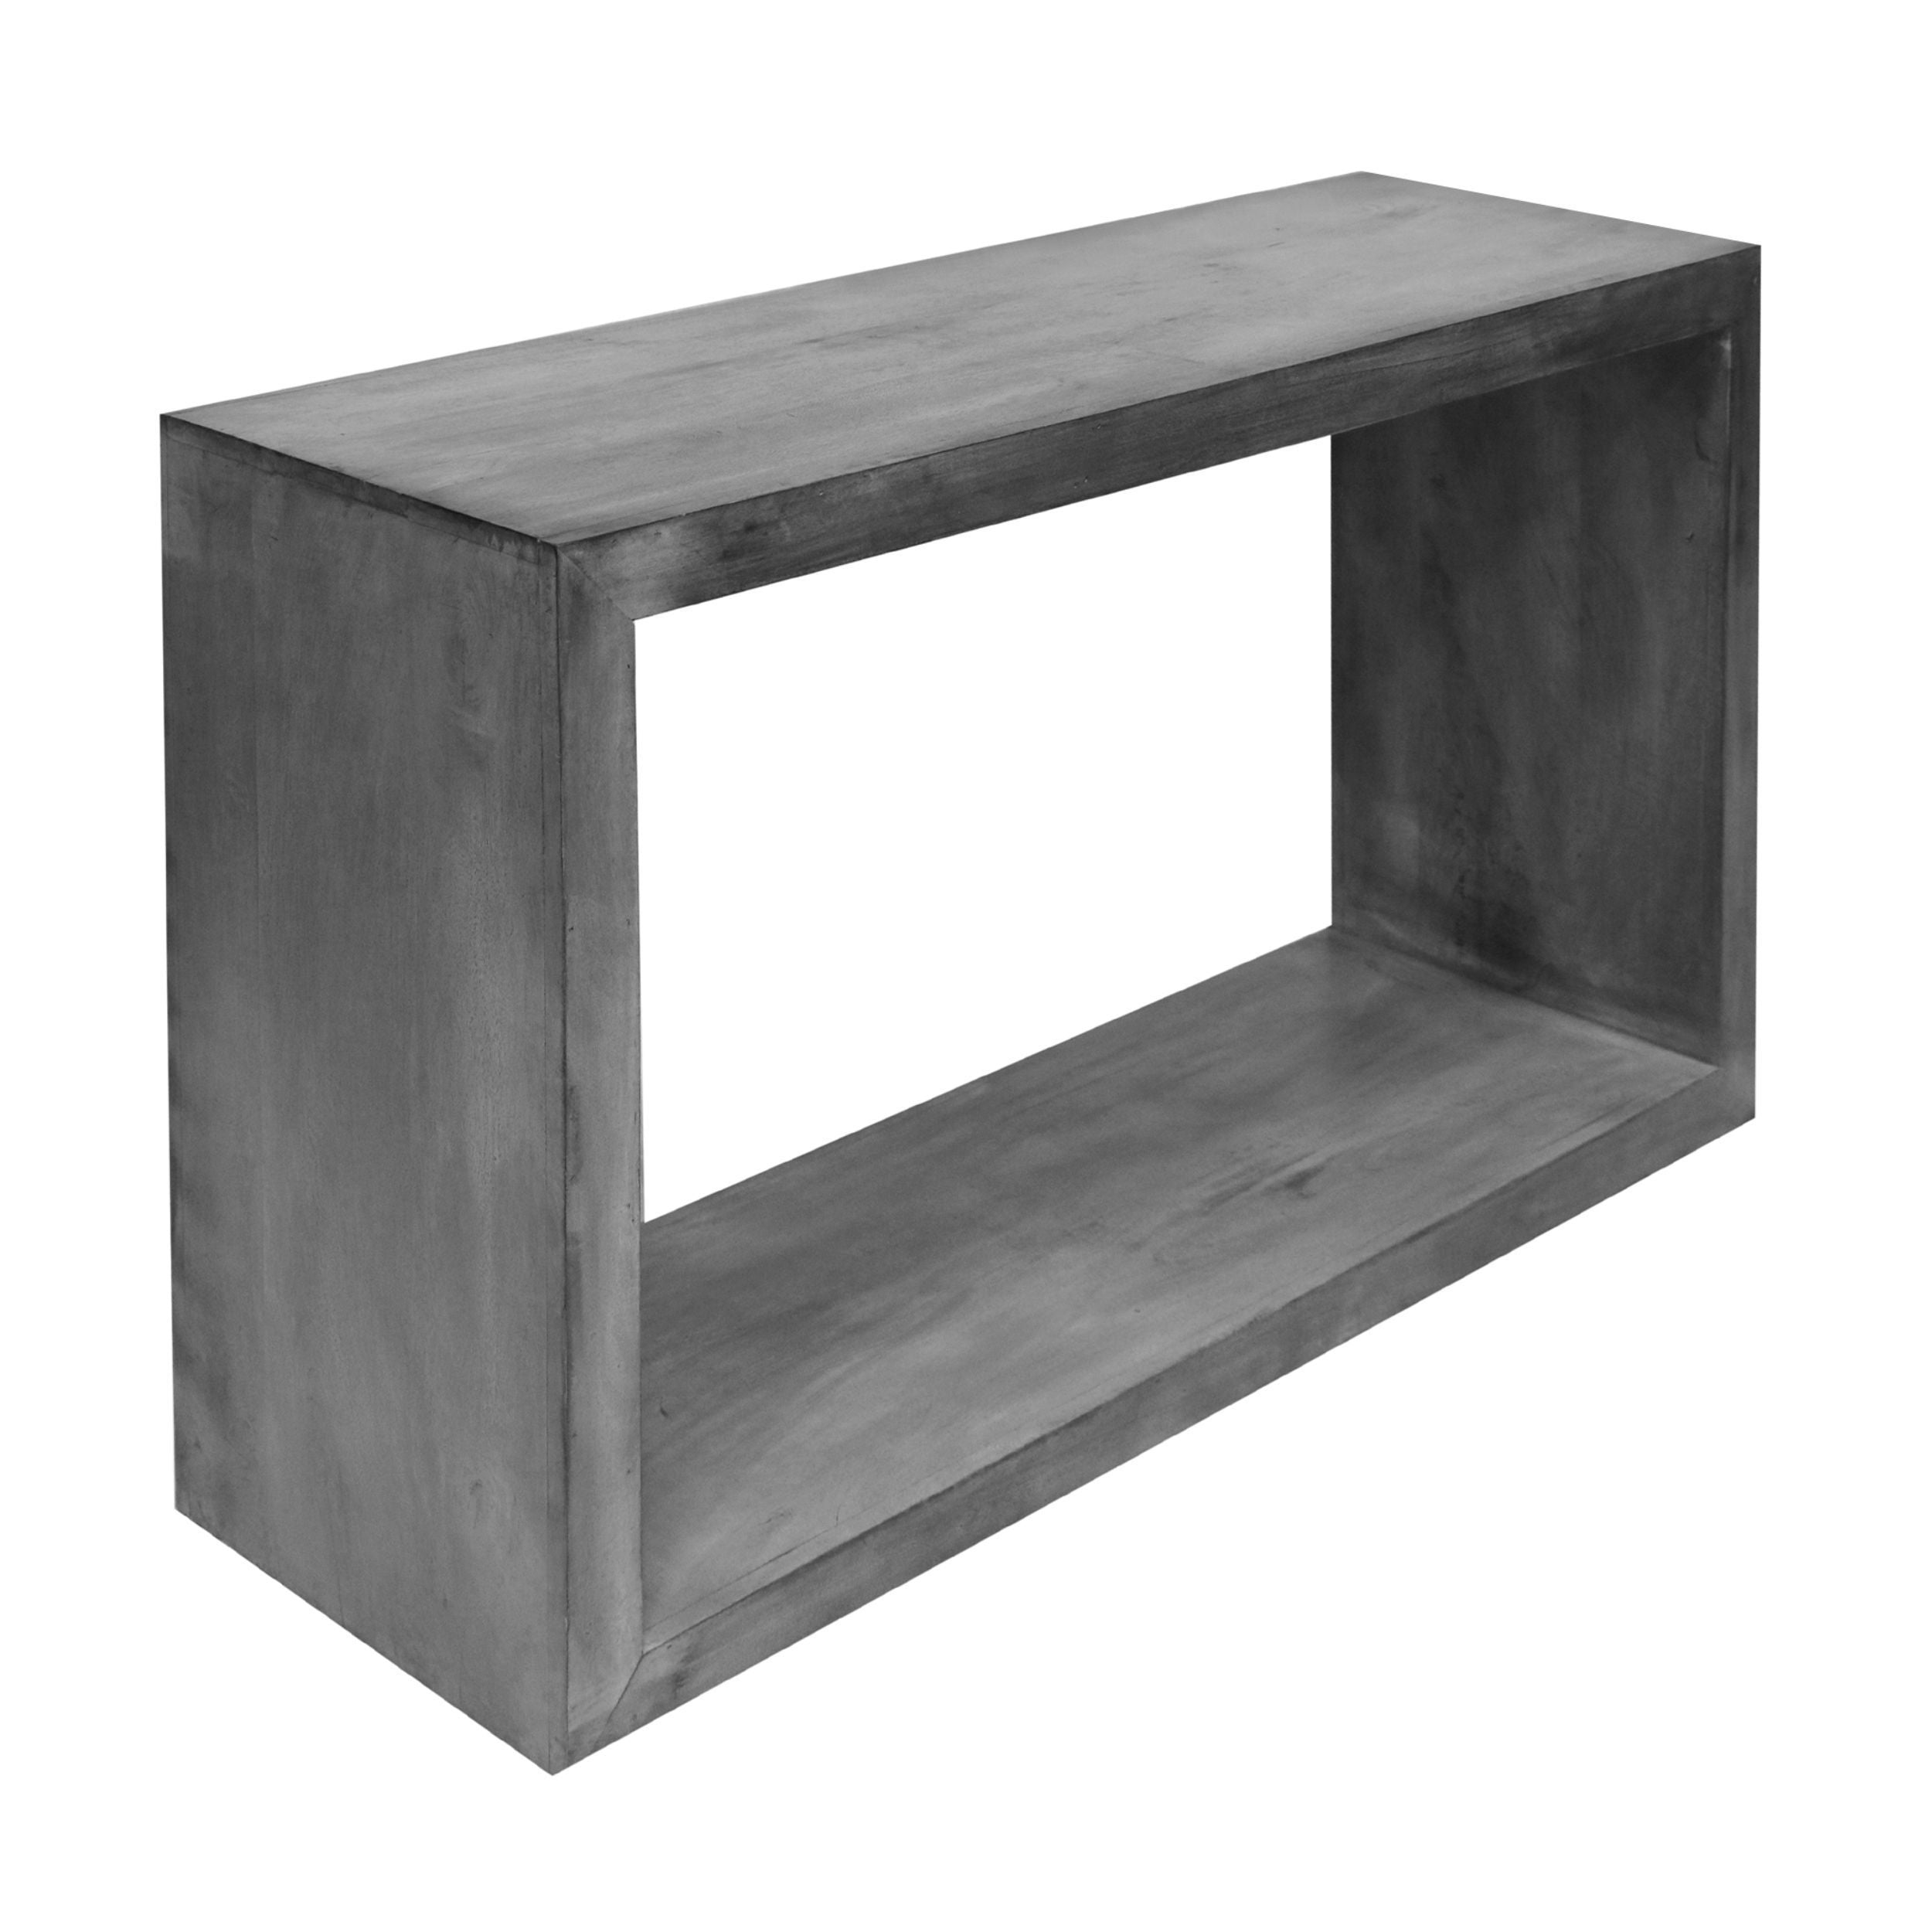 52" Cube Shape Wooden Console Table with Open Bottom Shelf - Charcoal Gray